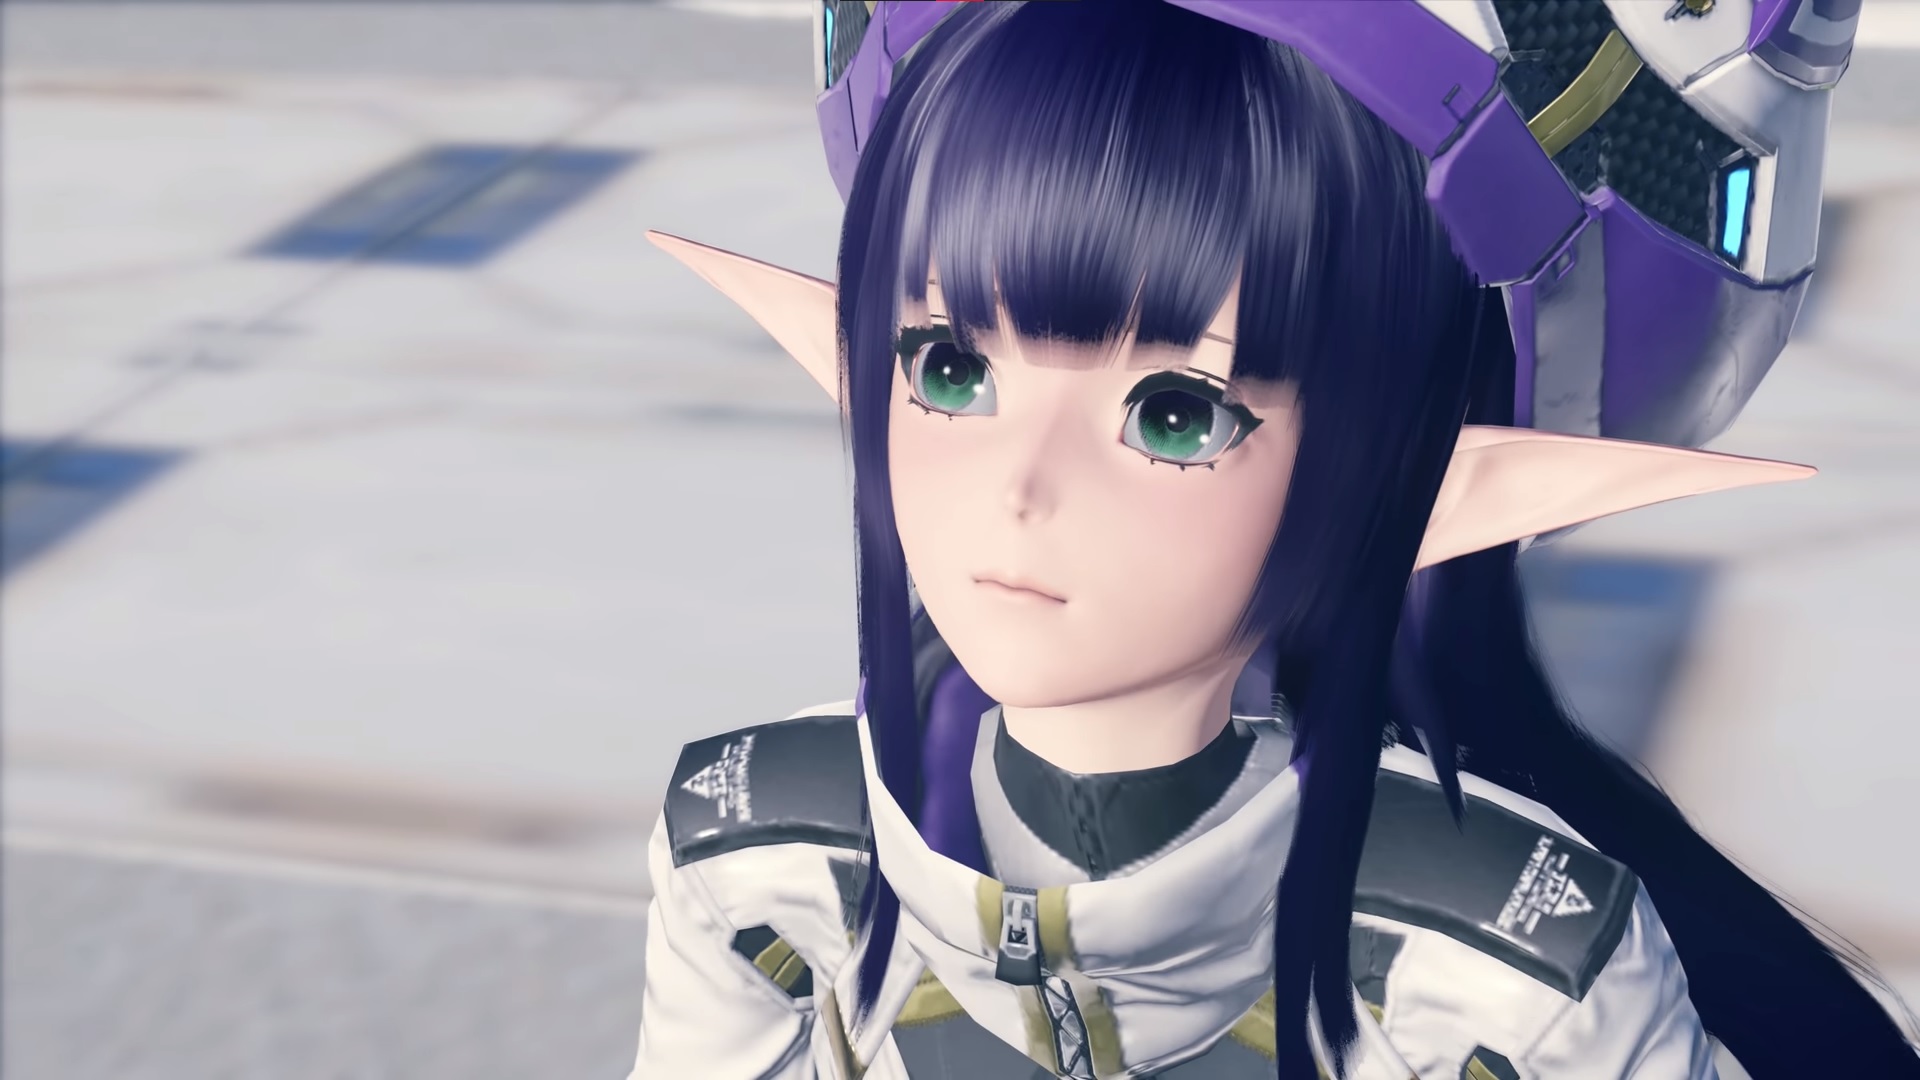 Phantasy Star Online 2 New Genesis Out Now and Free on PC and Xbox One